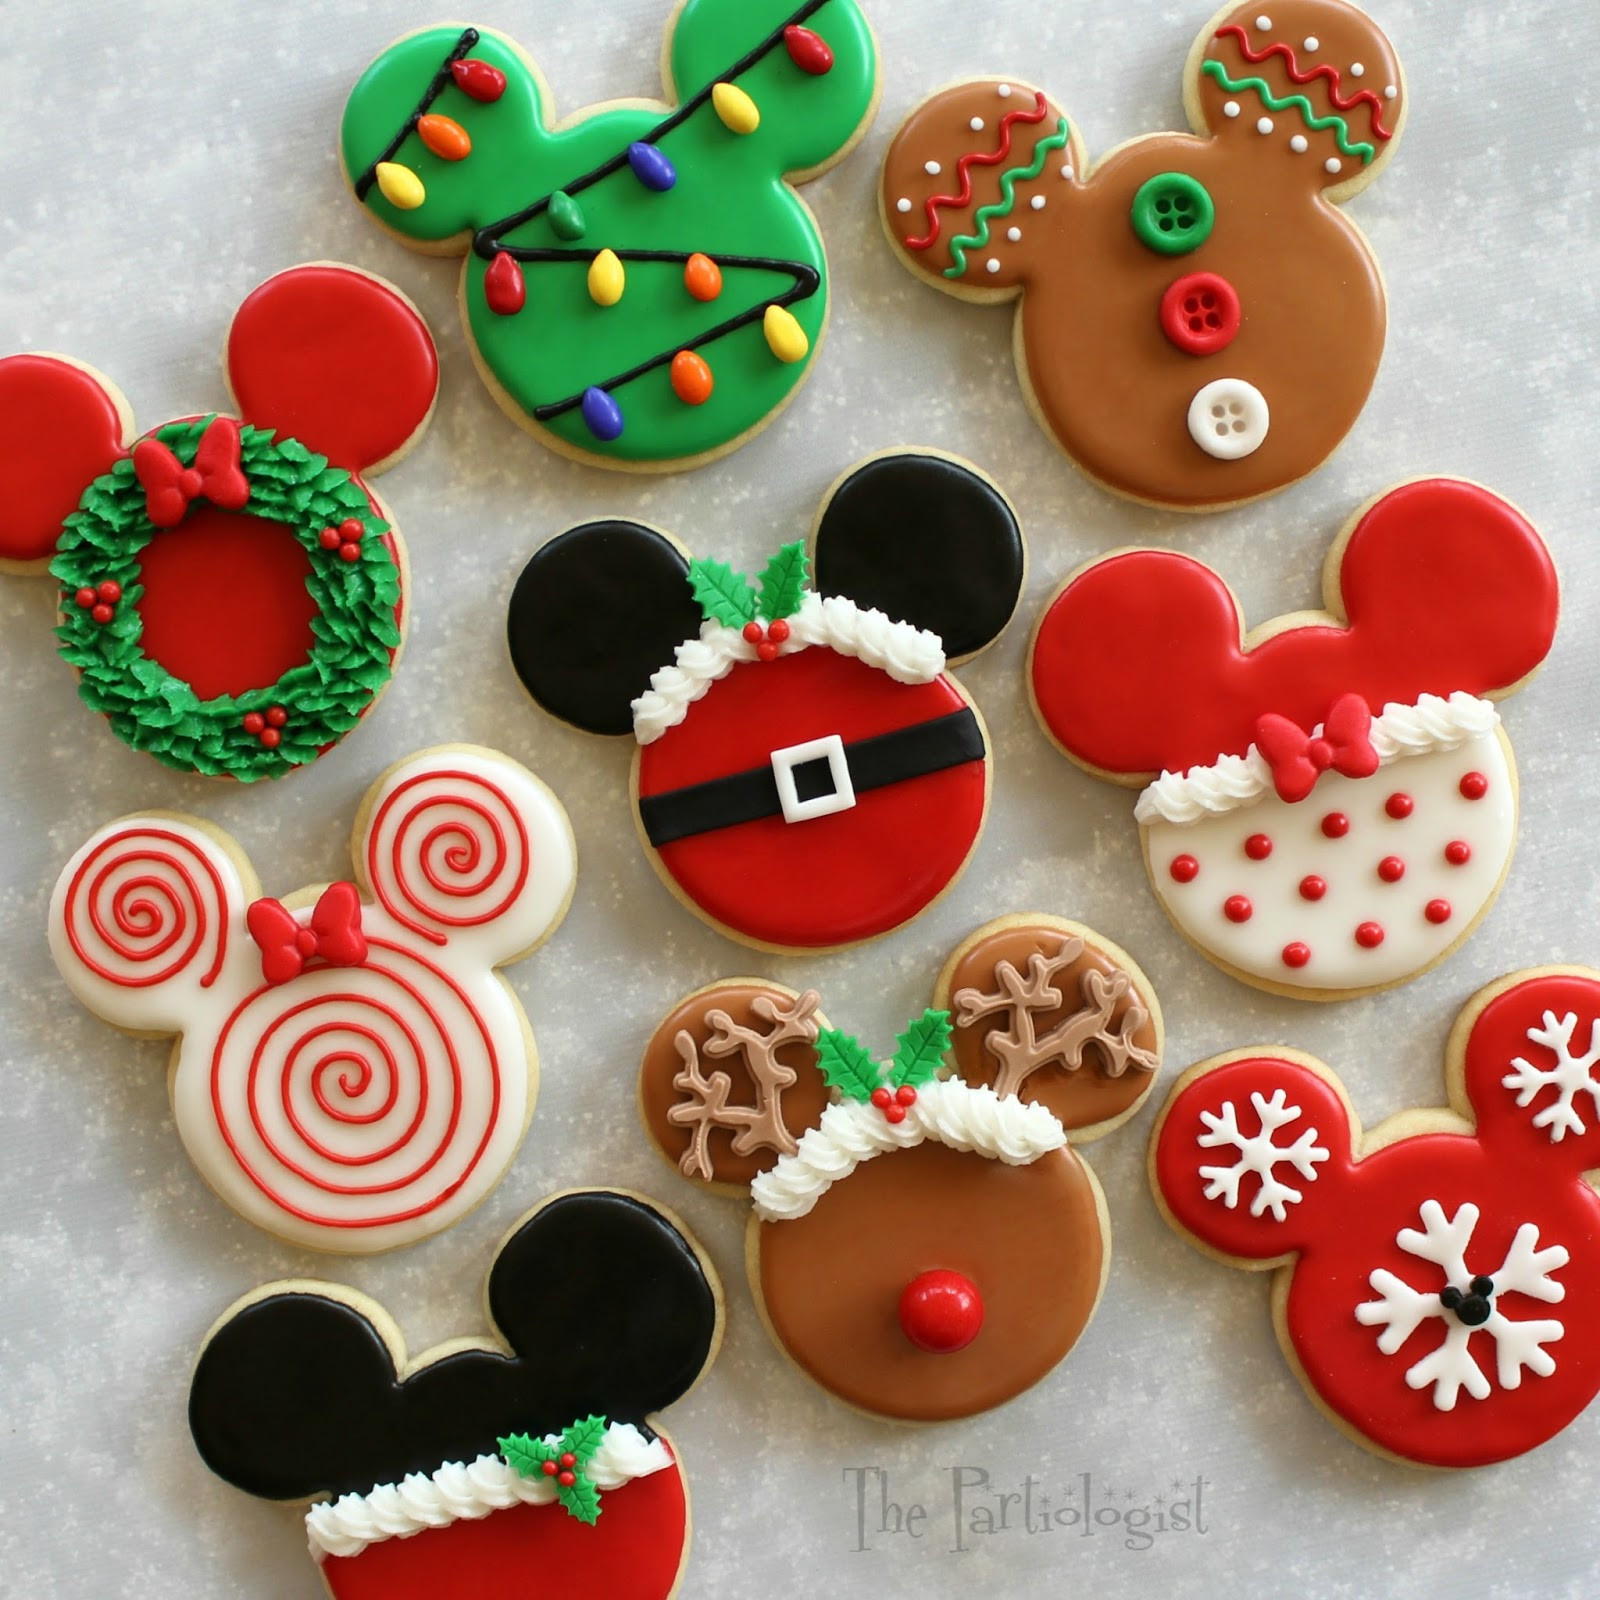 Christmas Cookies Com
 The Partiologist Disney Themed Christmas Cookies